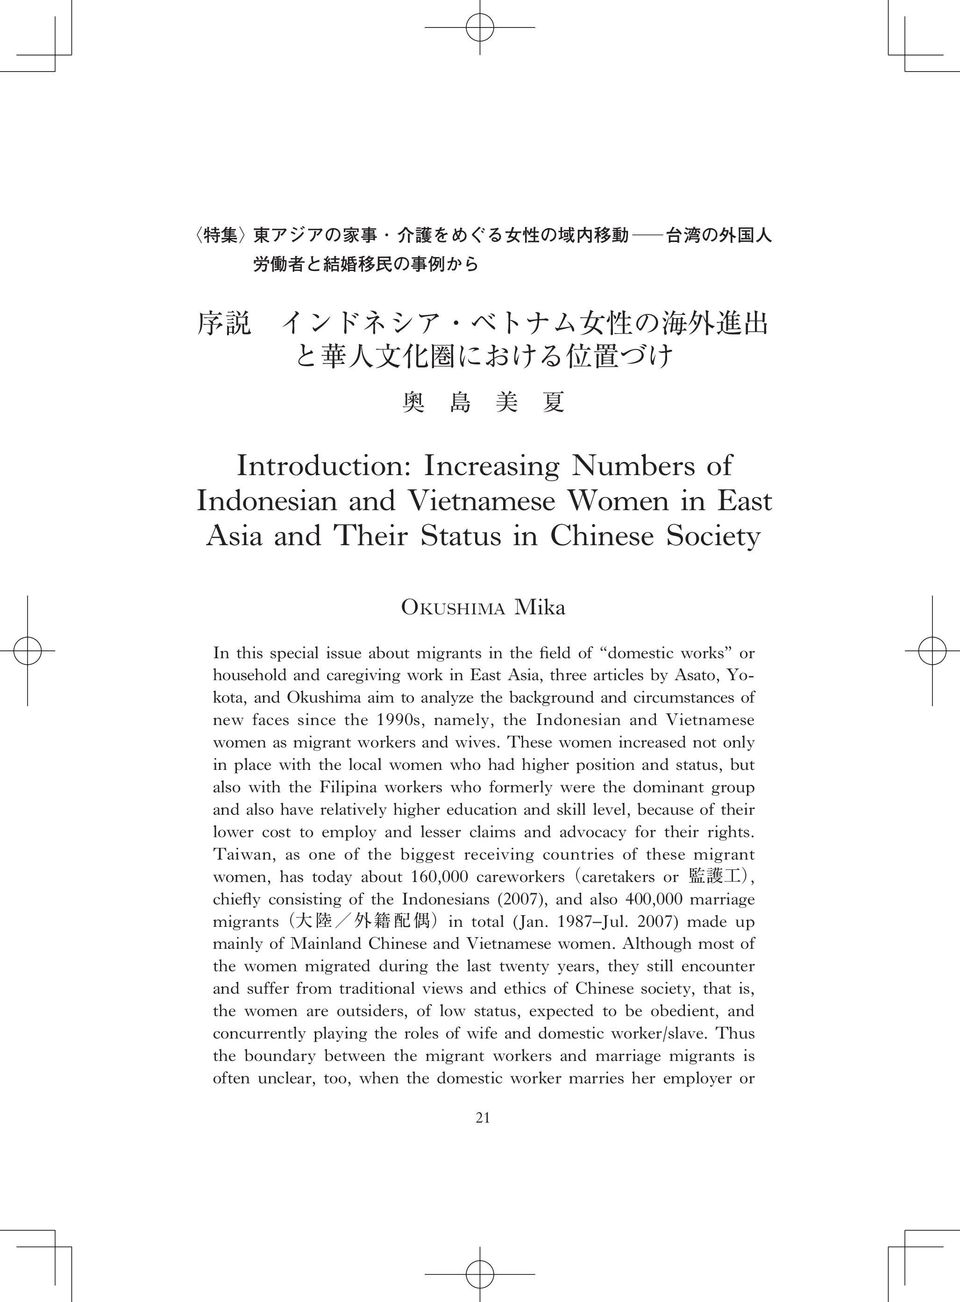 Vietnamese women as migrant workers and wives.